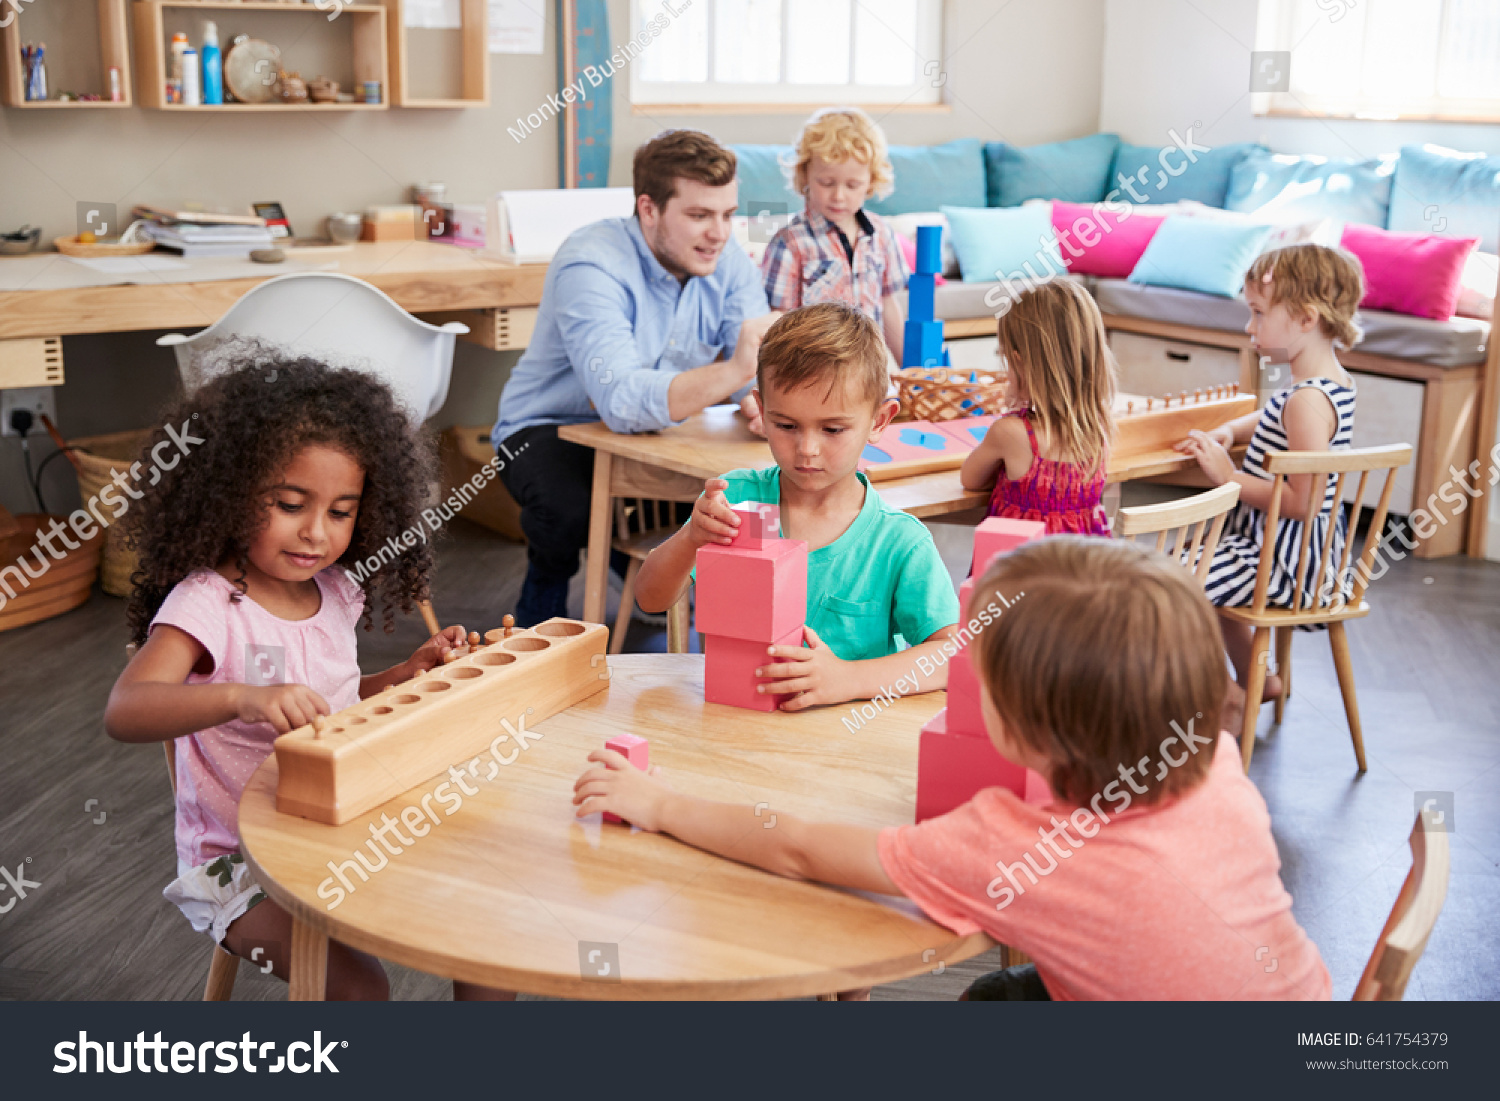 Teacher And Pupils Working At Tables In Montessori School #641754379